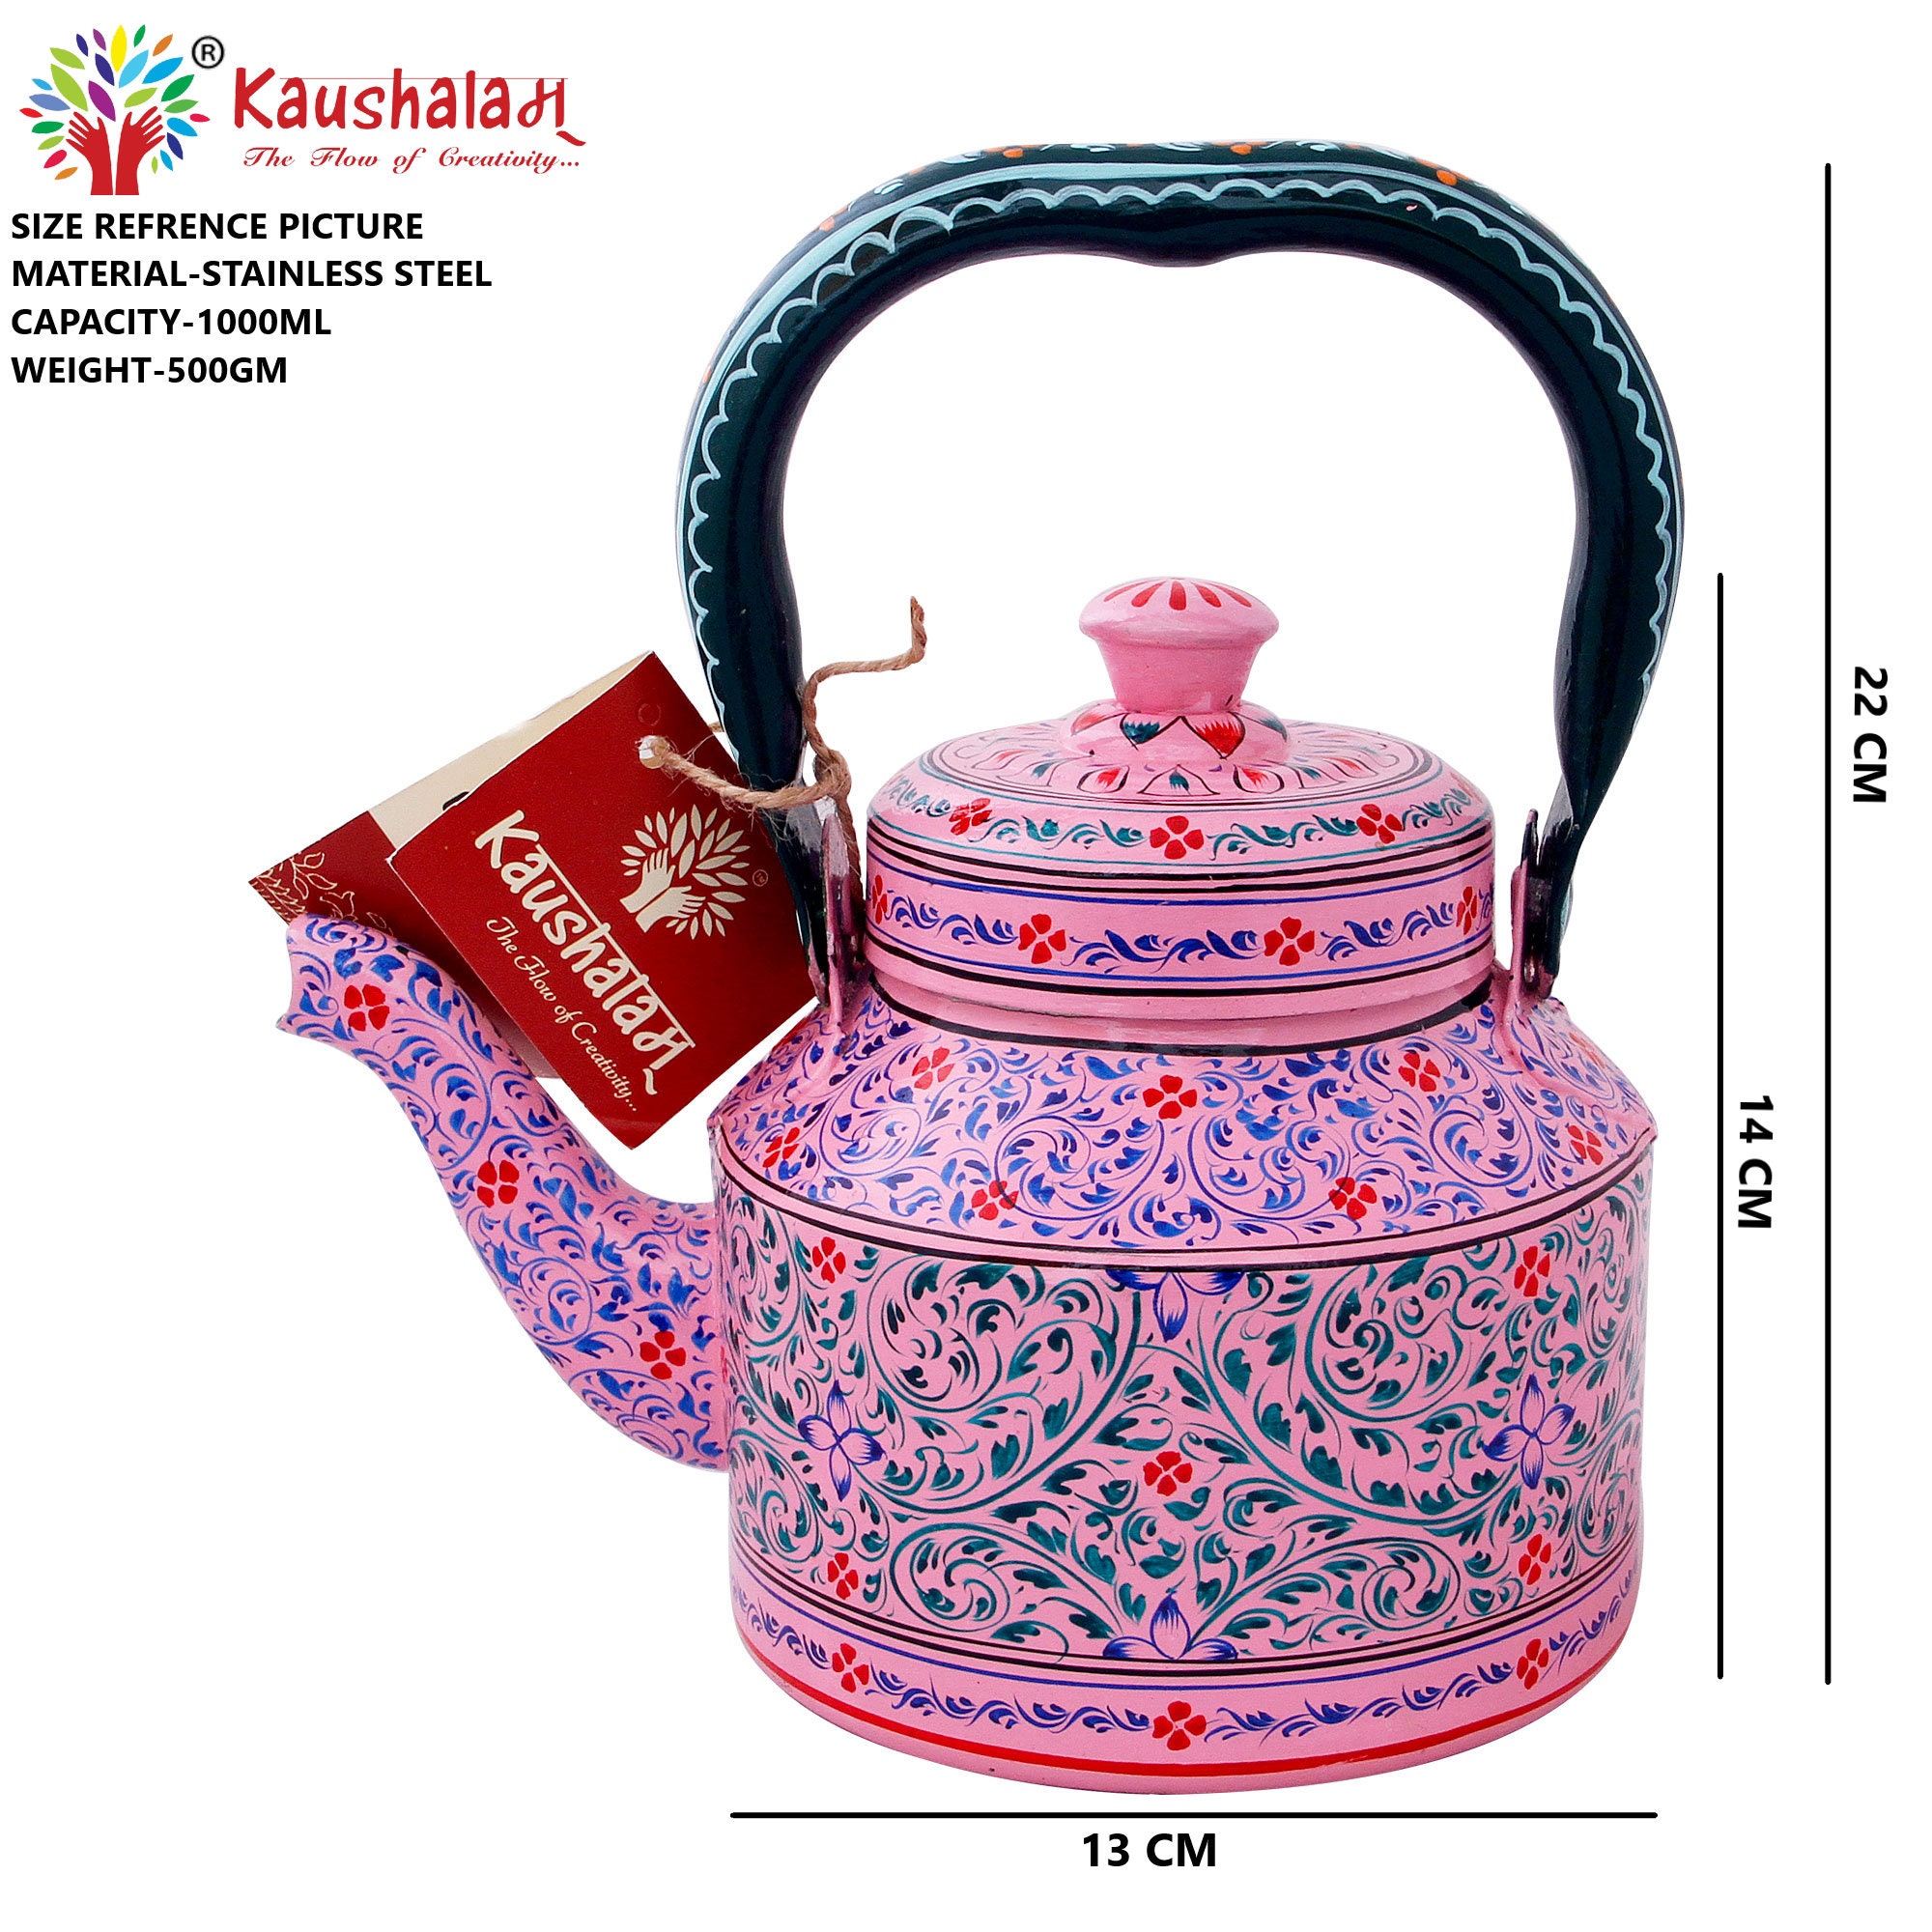 Pilaghanti - Hand Painted Chai Kettle Teapot in White, Green, & Yellow